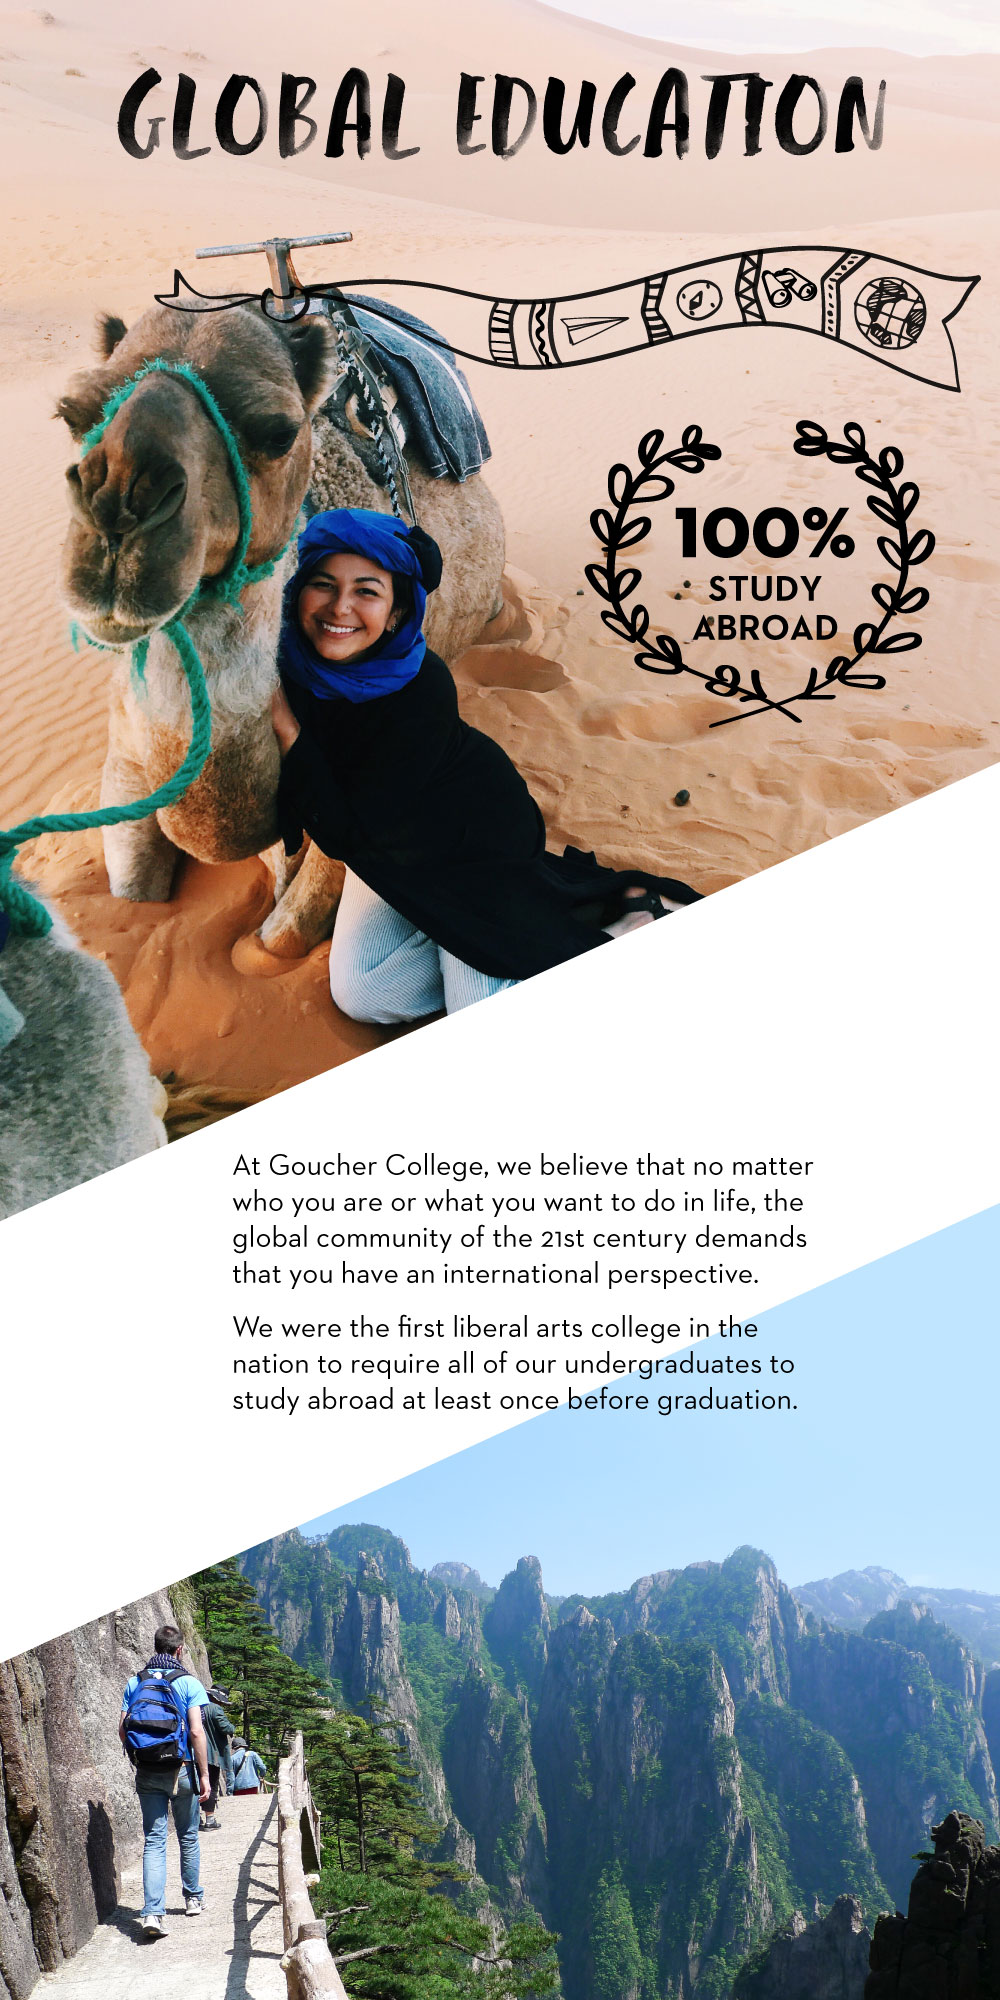 At Goucher College, we believe that no matter who you are or waht you want to do in life, the global community of the 21st century demands that you have an international perspective